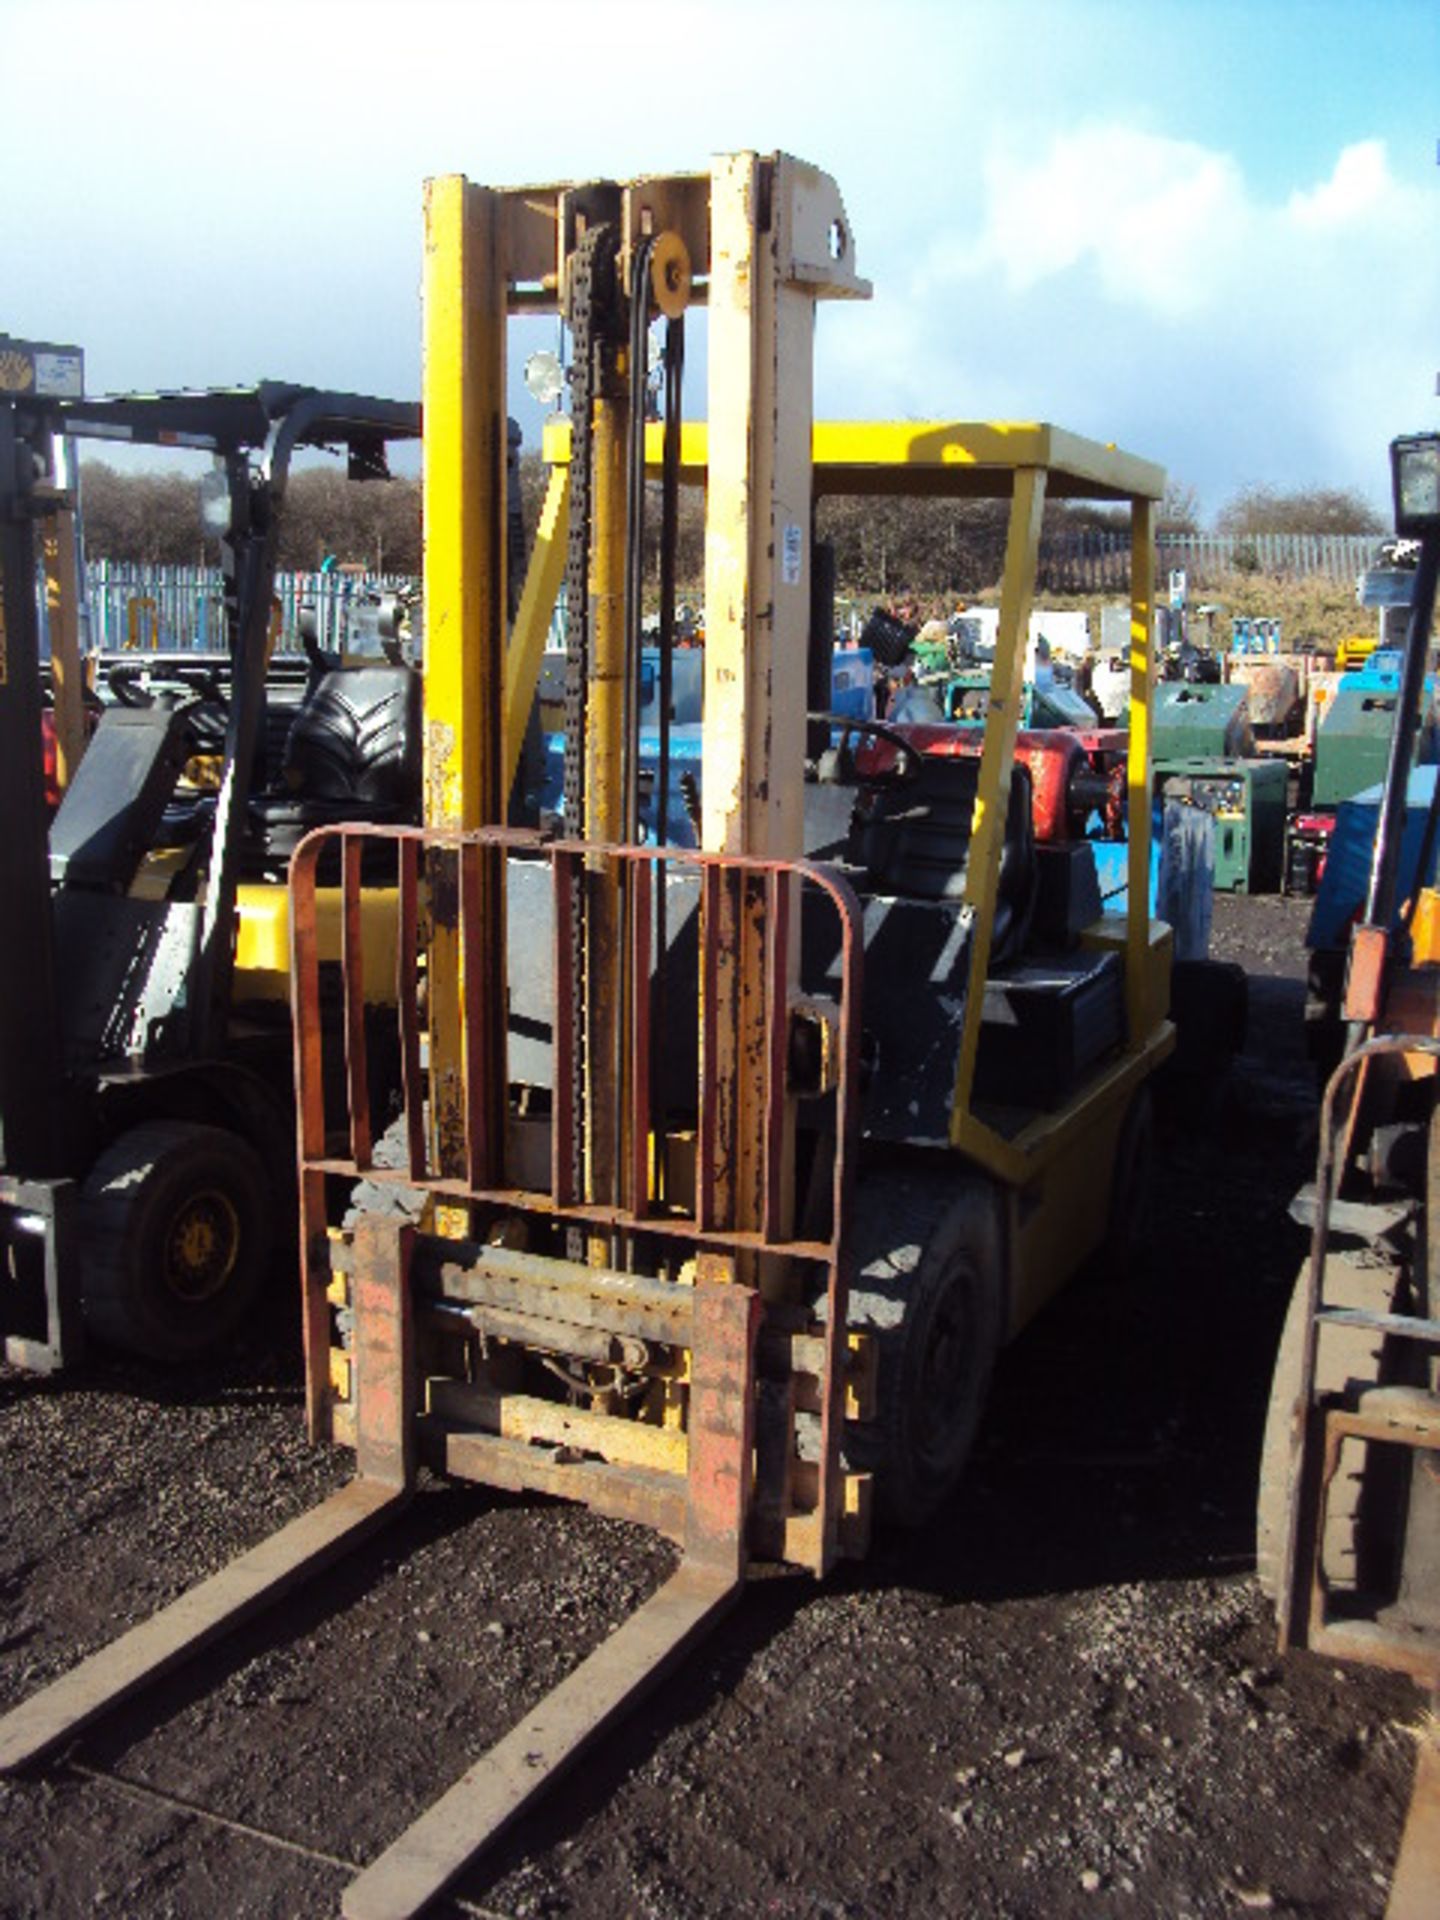 LANSING 72.0 2t gas driven forklift truck with side-shift